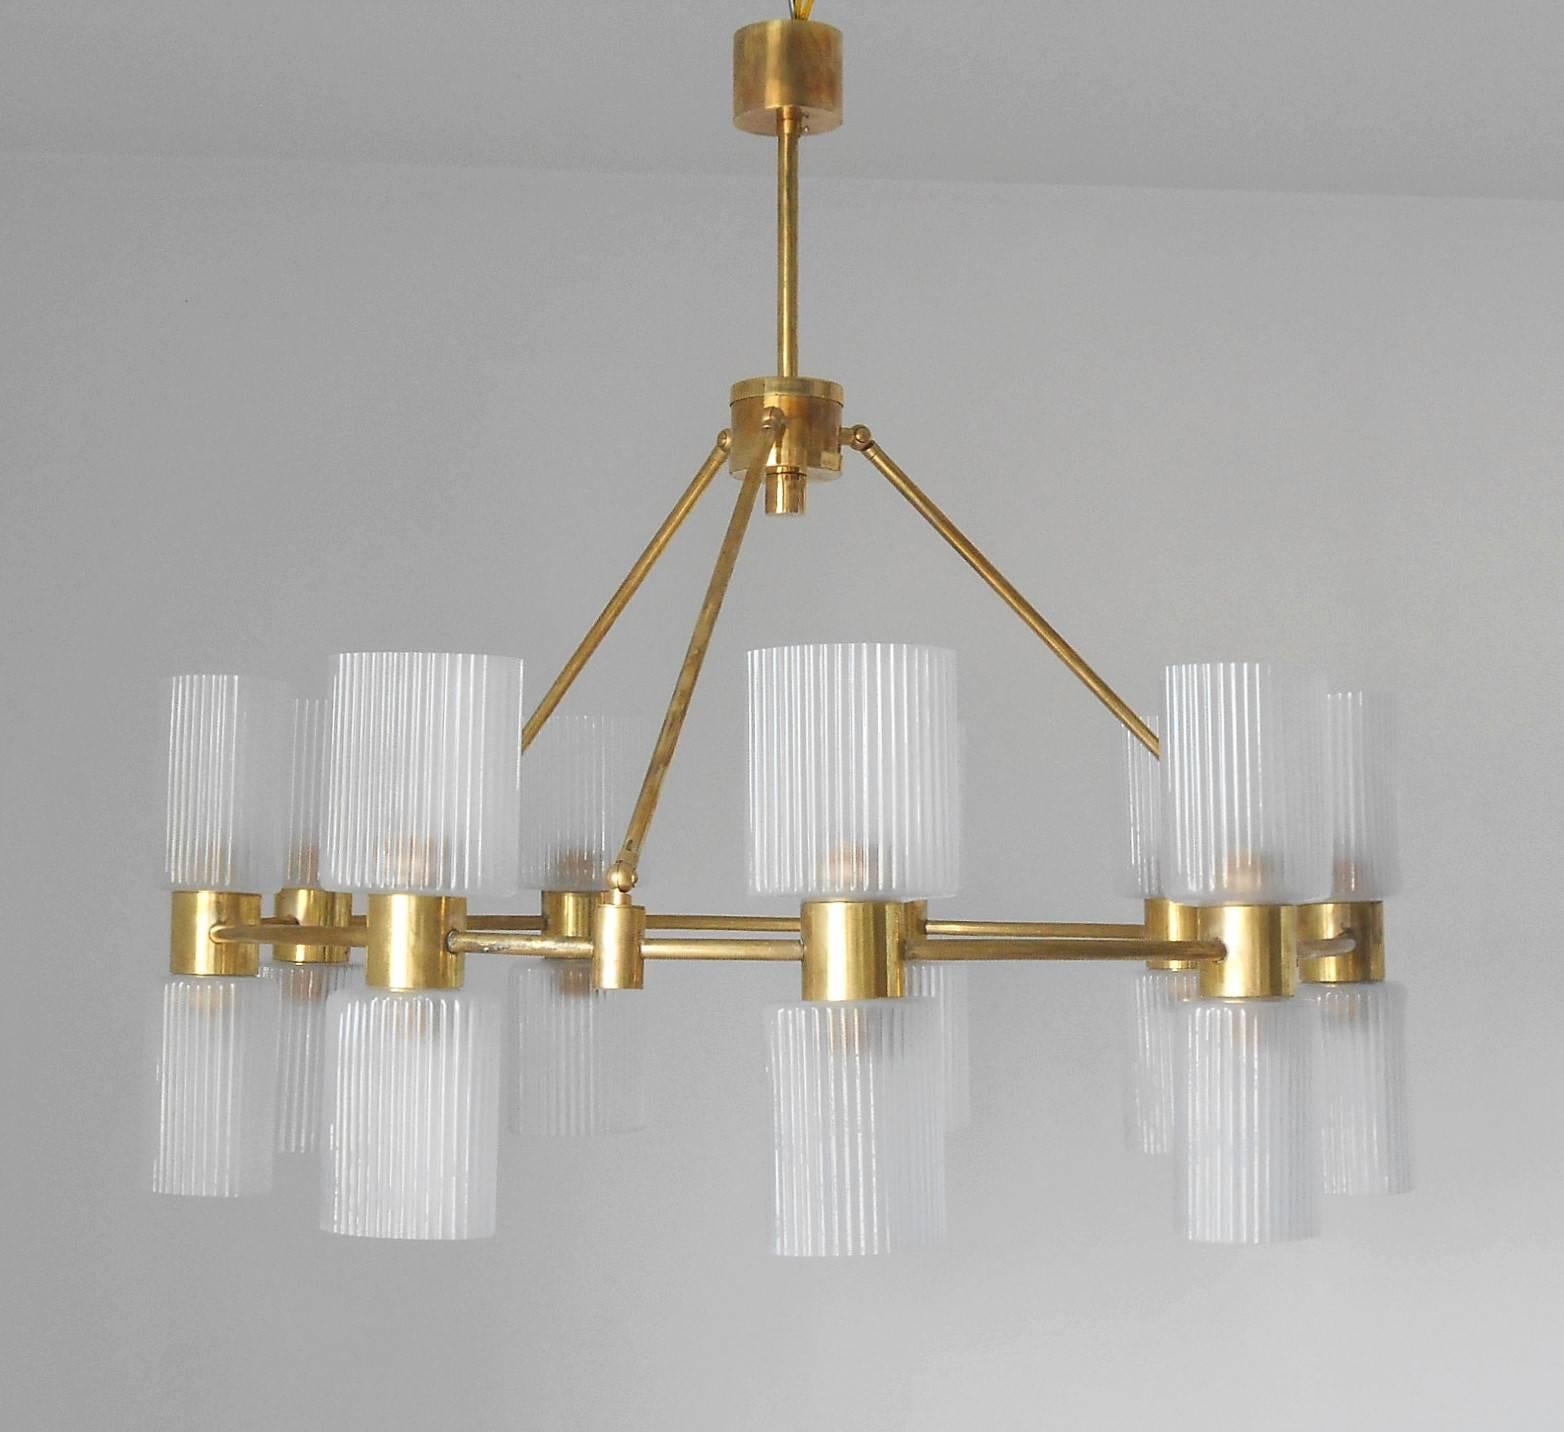 Frosted ribbed glass shades mounted on brass structure, in the style of Stilnovo.
18 light sockets / wired for the US.
 A pair available ; price listed is for one chandelier.